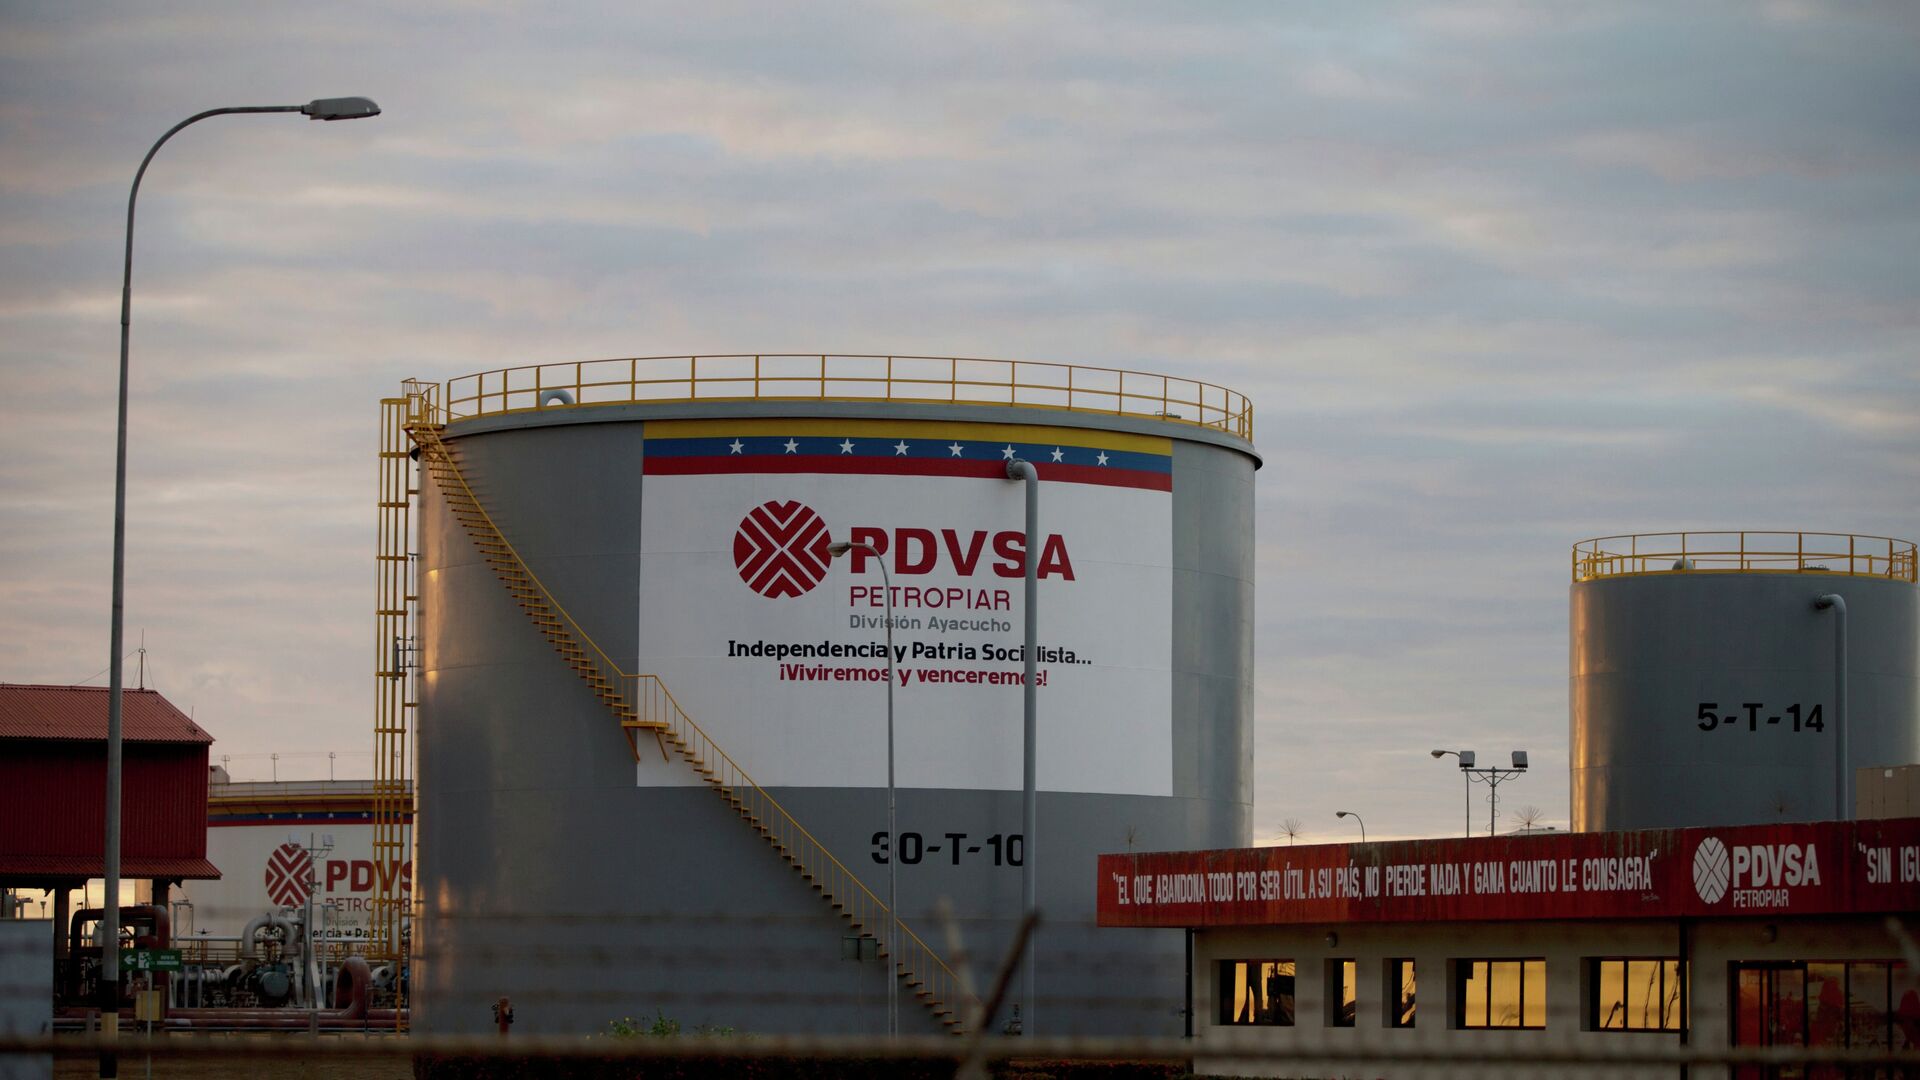 Storage tanks stand in a PDVSA state-run oil company crude oil complex near El Tigre, a town located within Venezuela's Hugo Chavez oil belt, formally known as the Orinoco Belt - Sputnik International, 1920, 10.09.2021